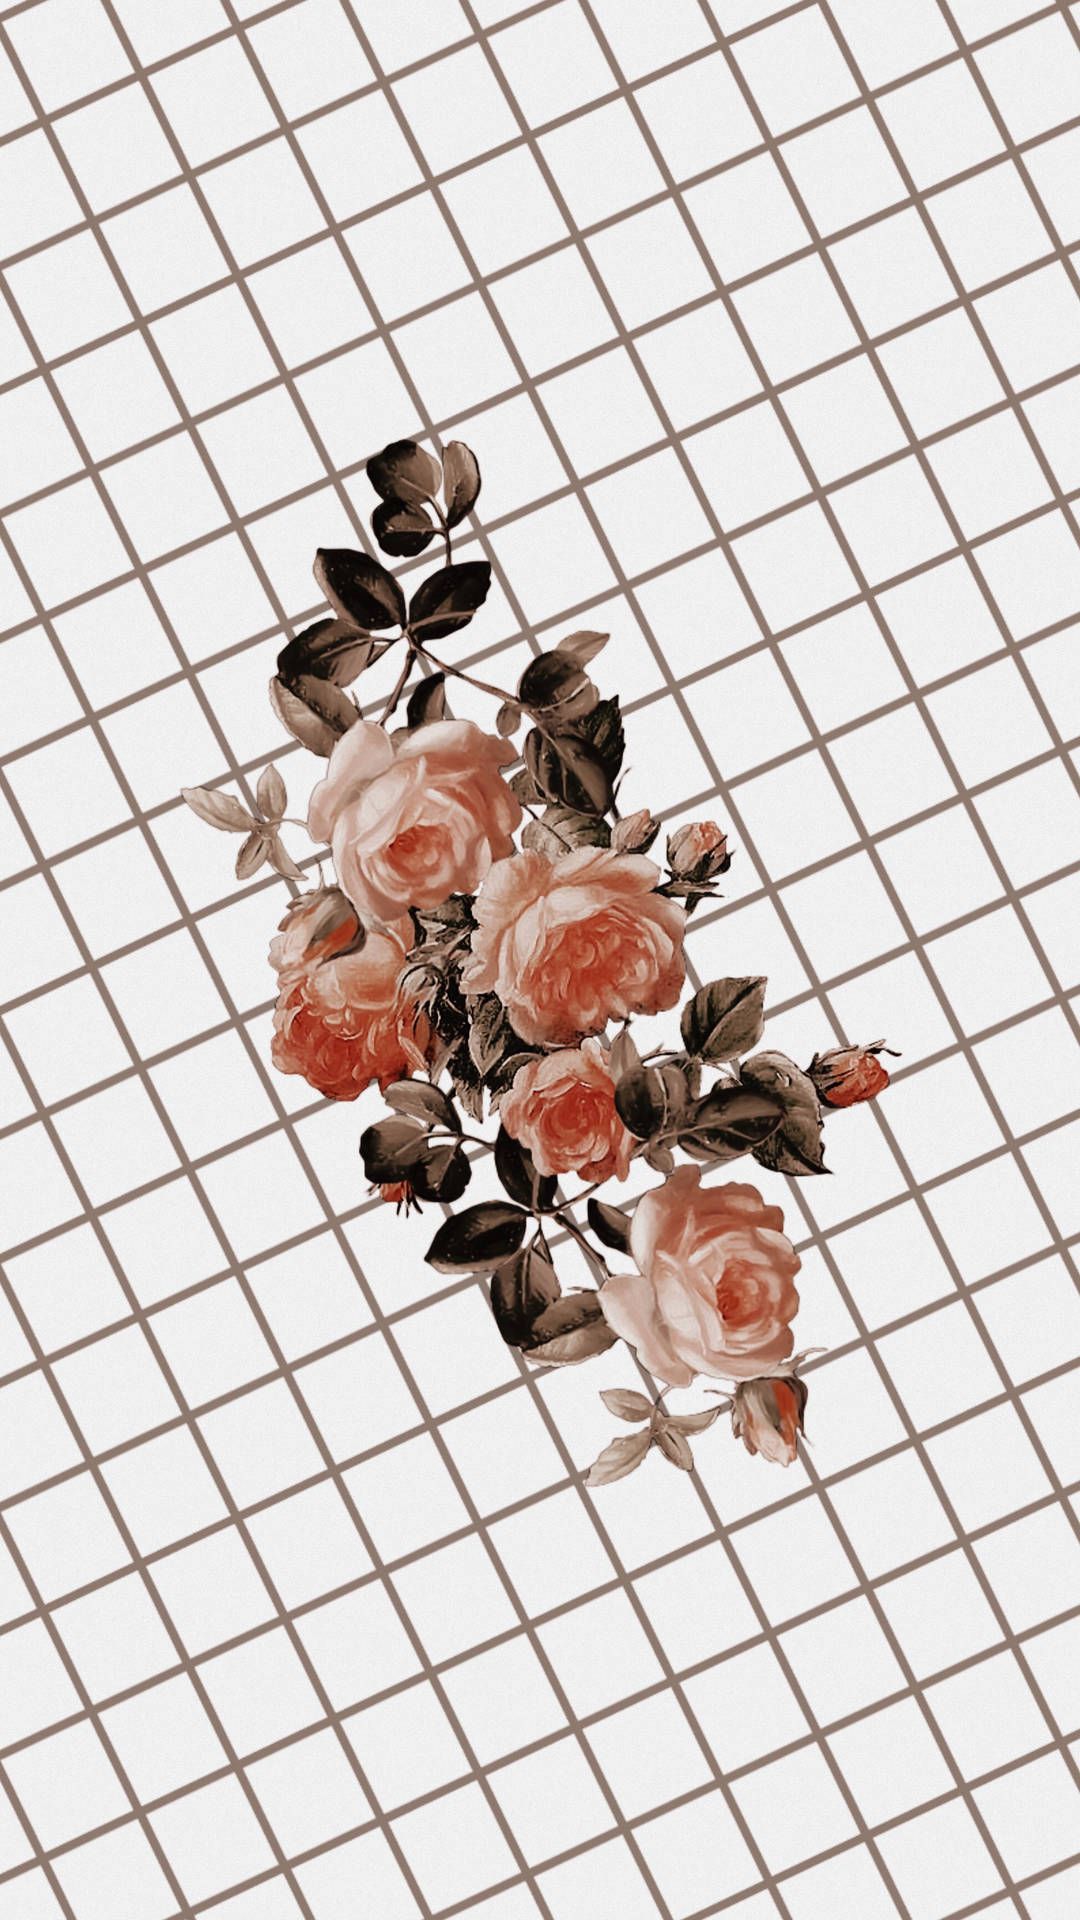 Aesthetic background of roses on a grid background - Roses